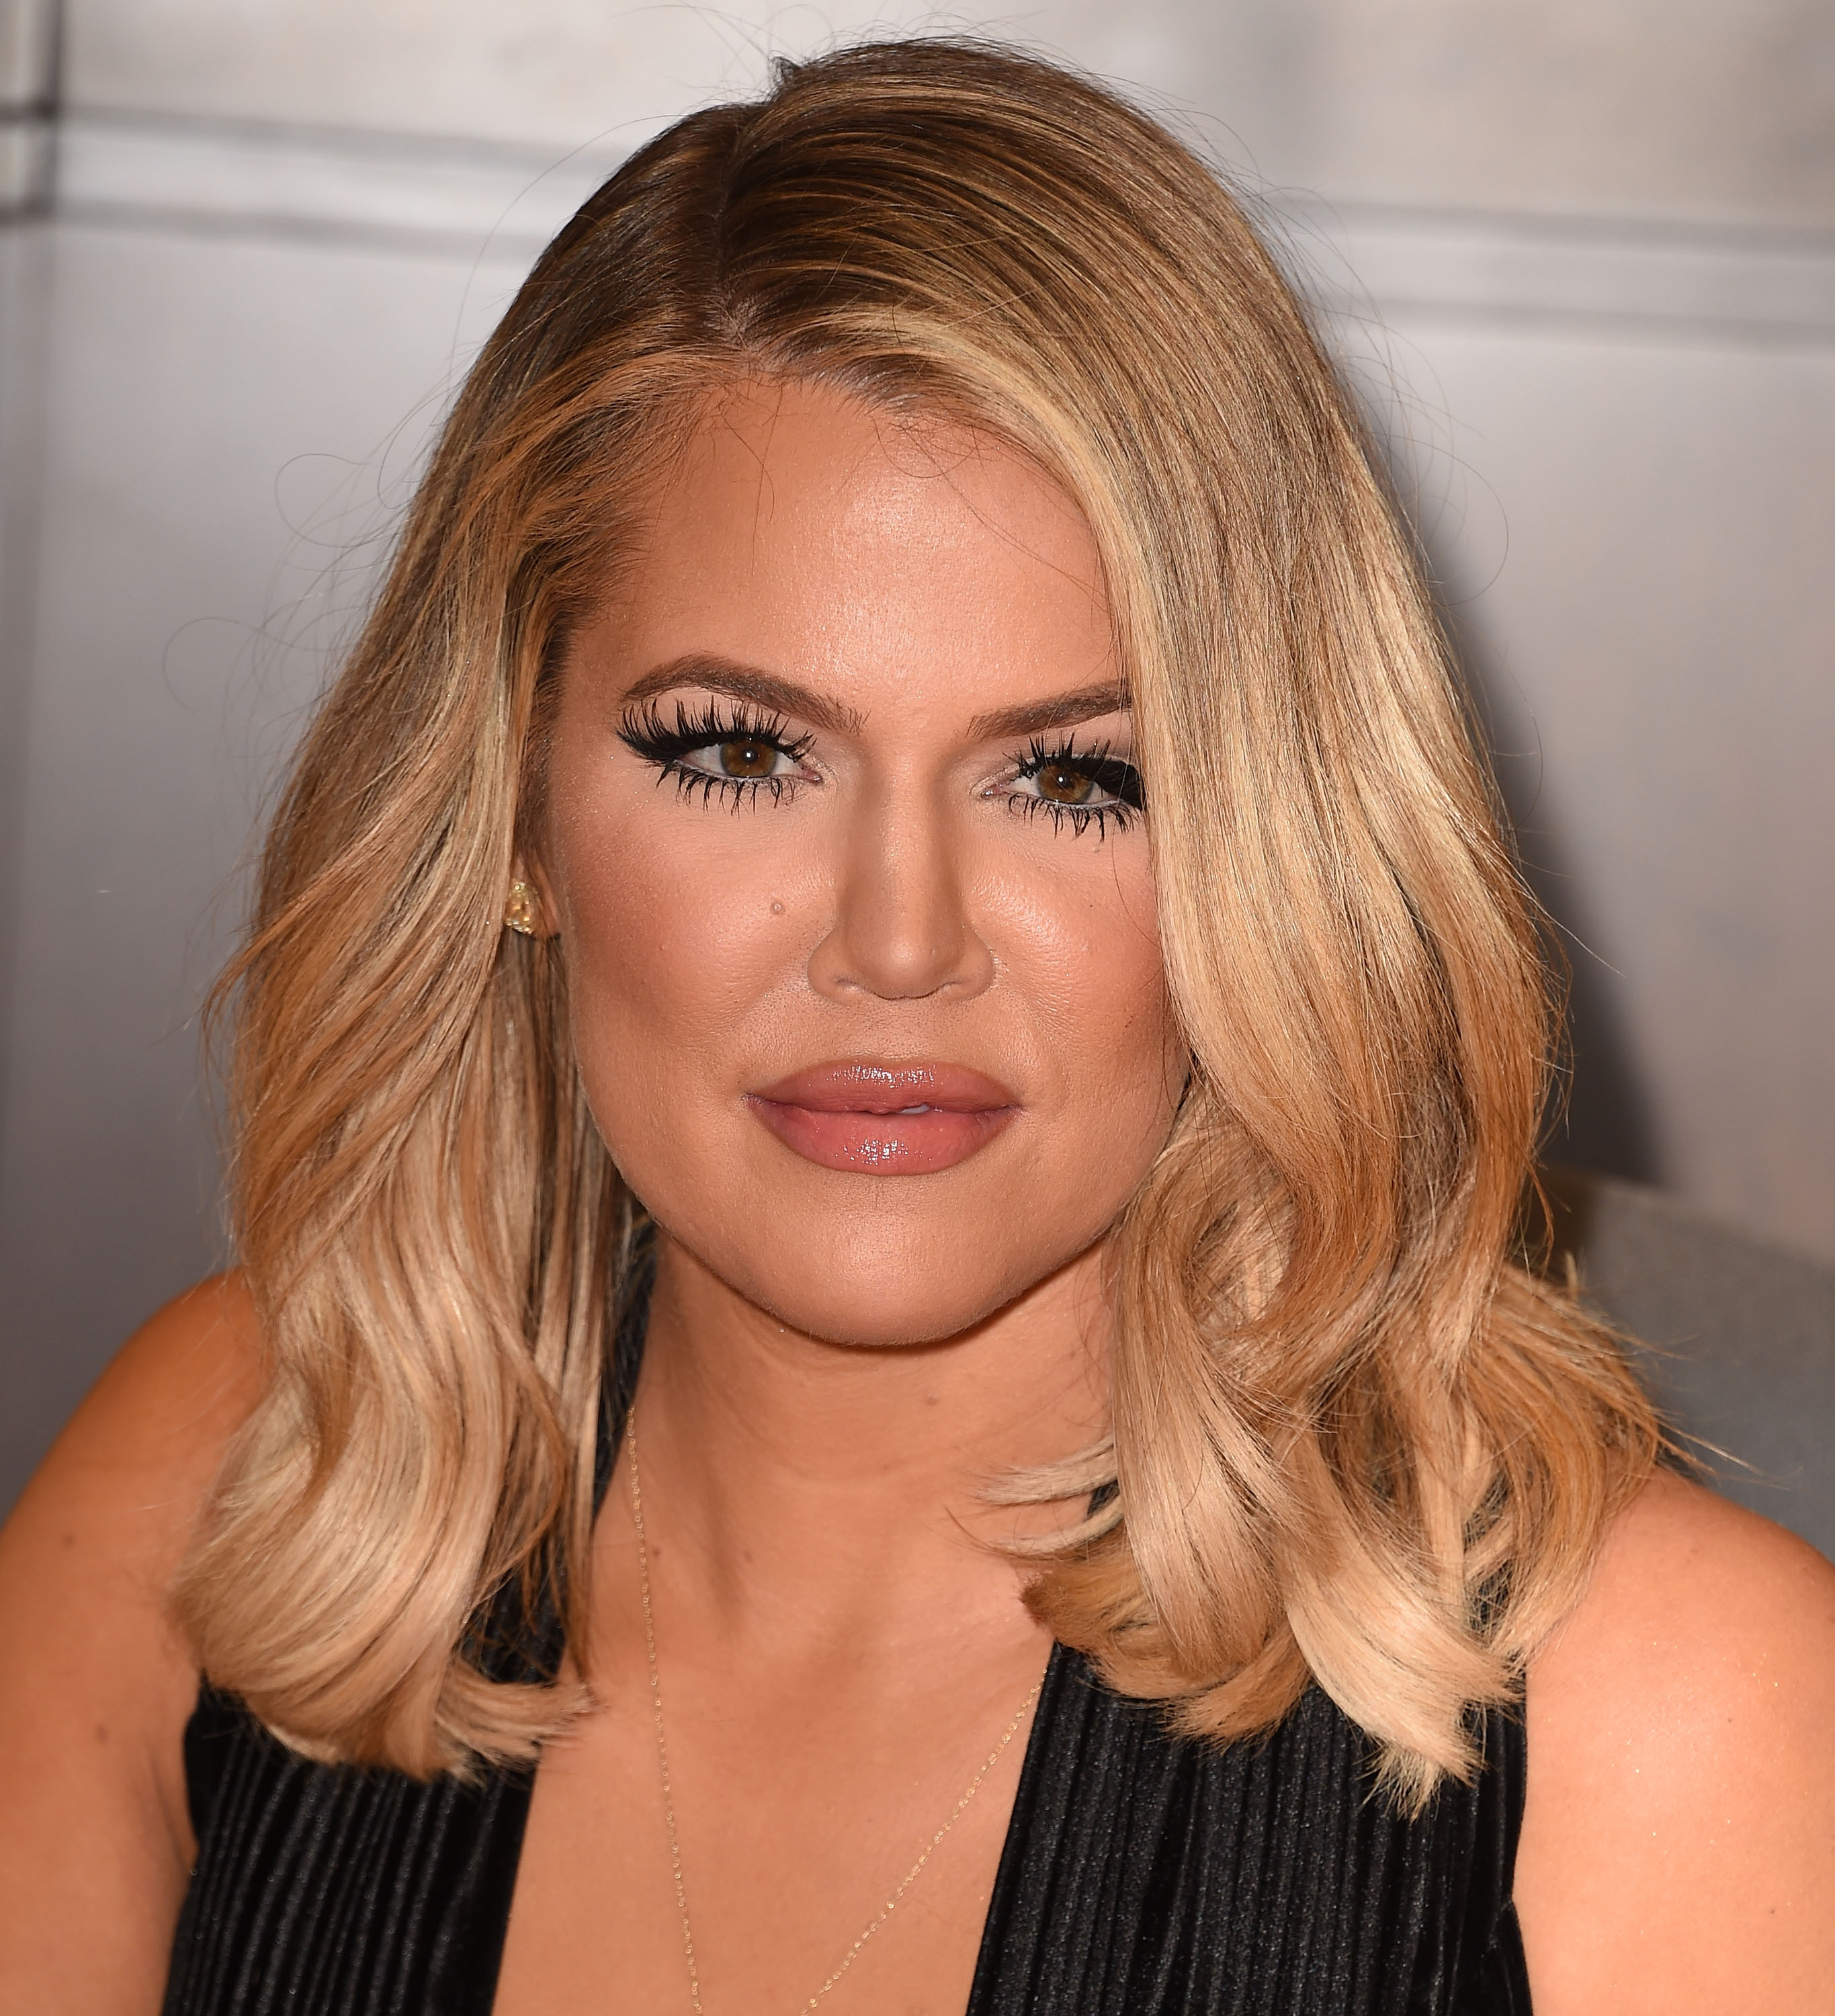 Khloe Kardashian Signs And Discusses Her New Book "Strong Looks Better Naked" With Quick Weight Loss 